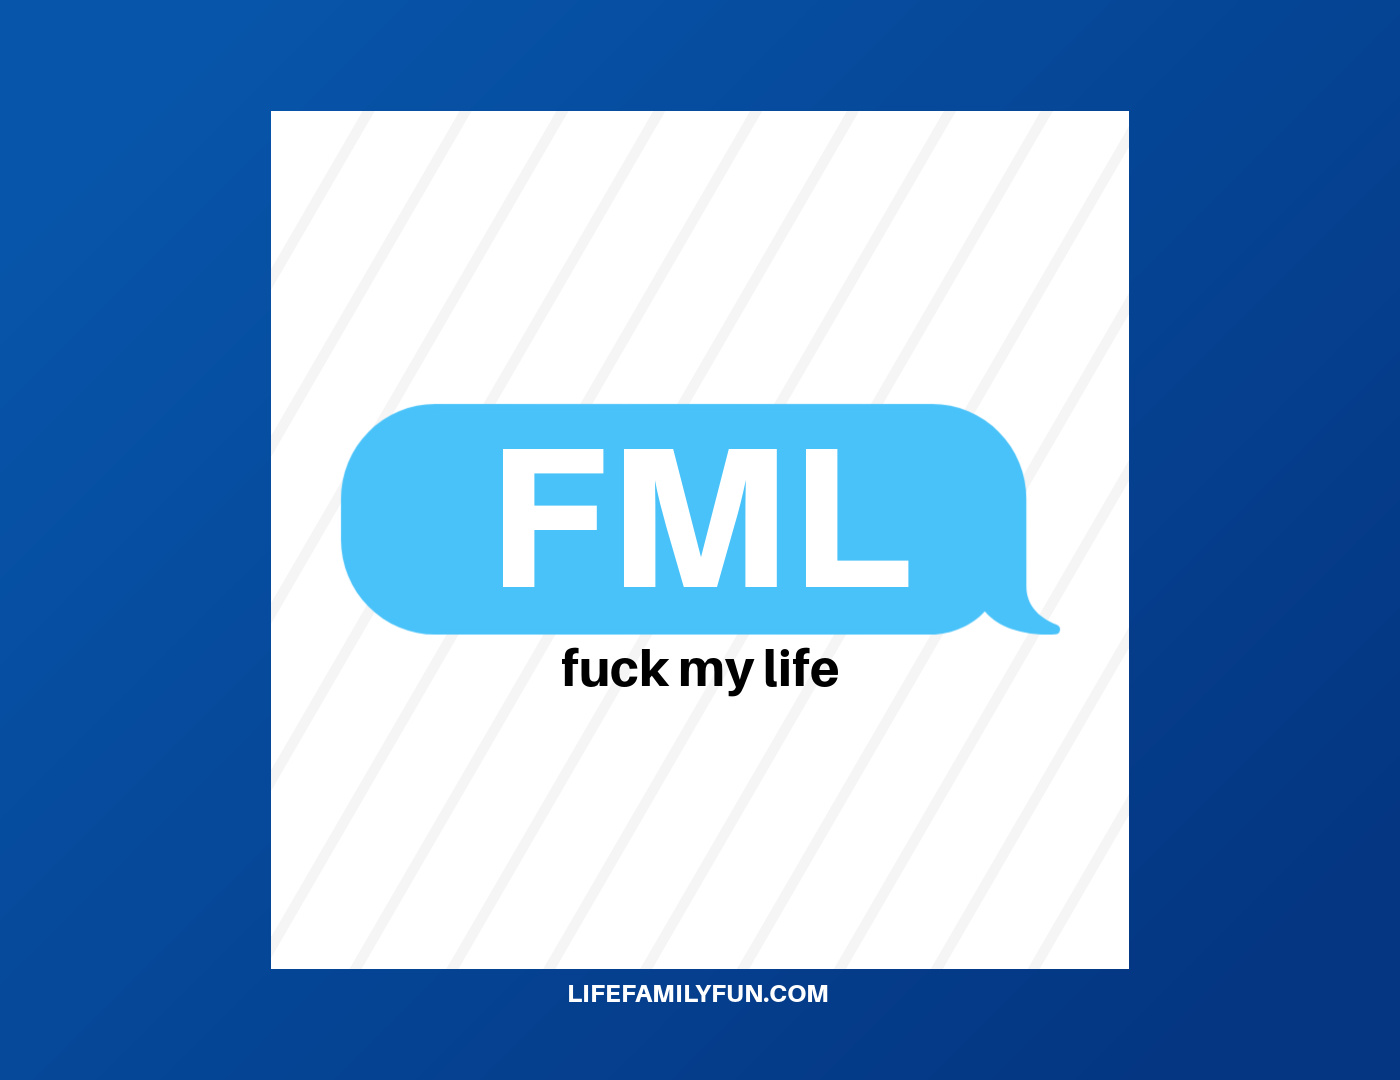 FML meaning